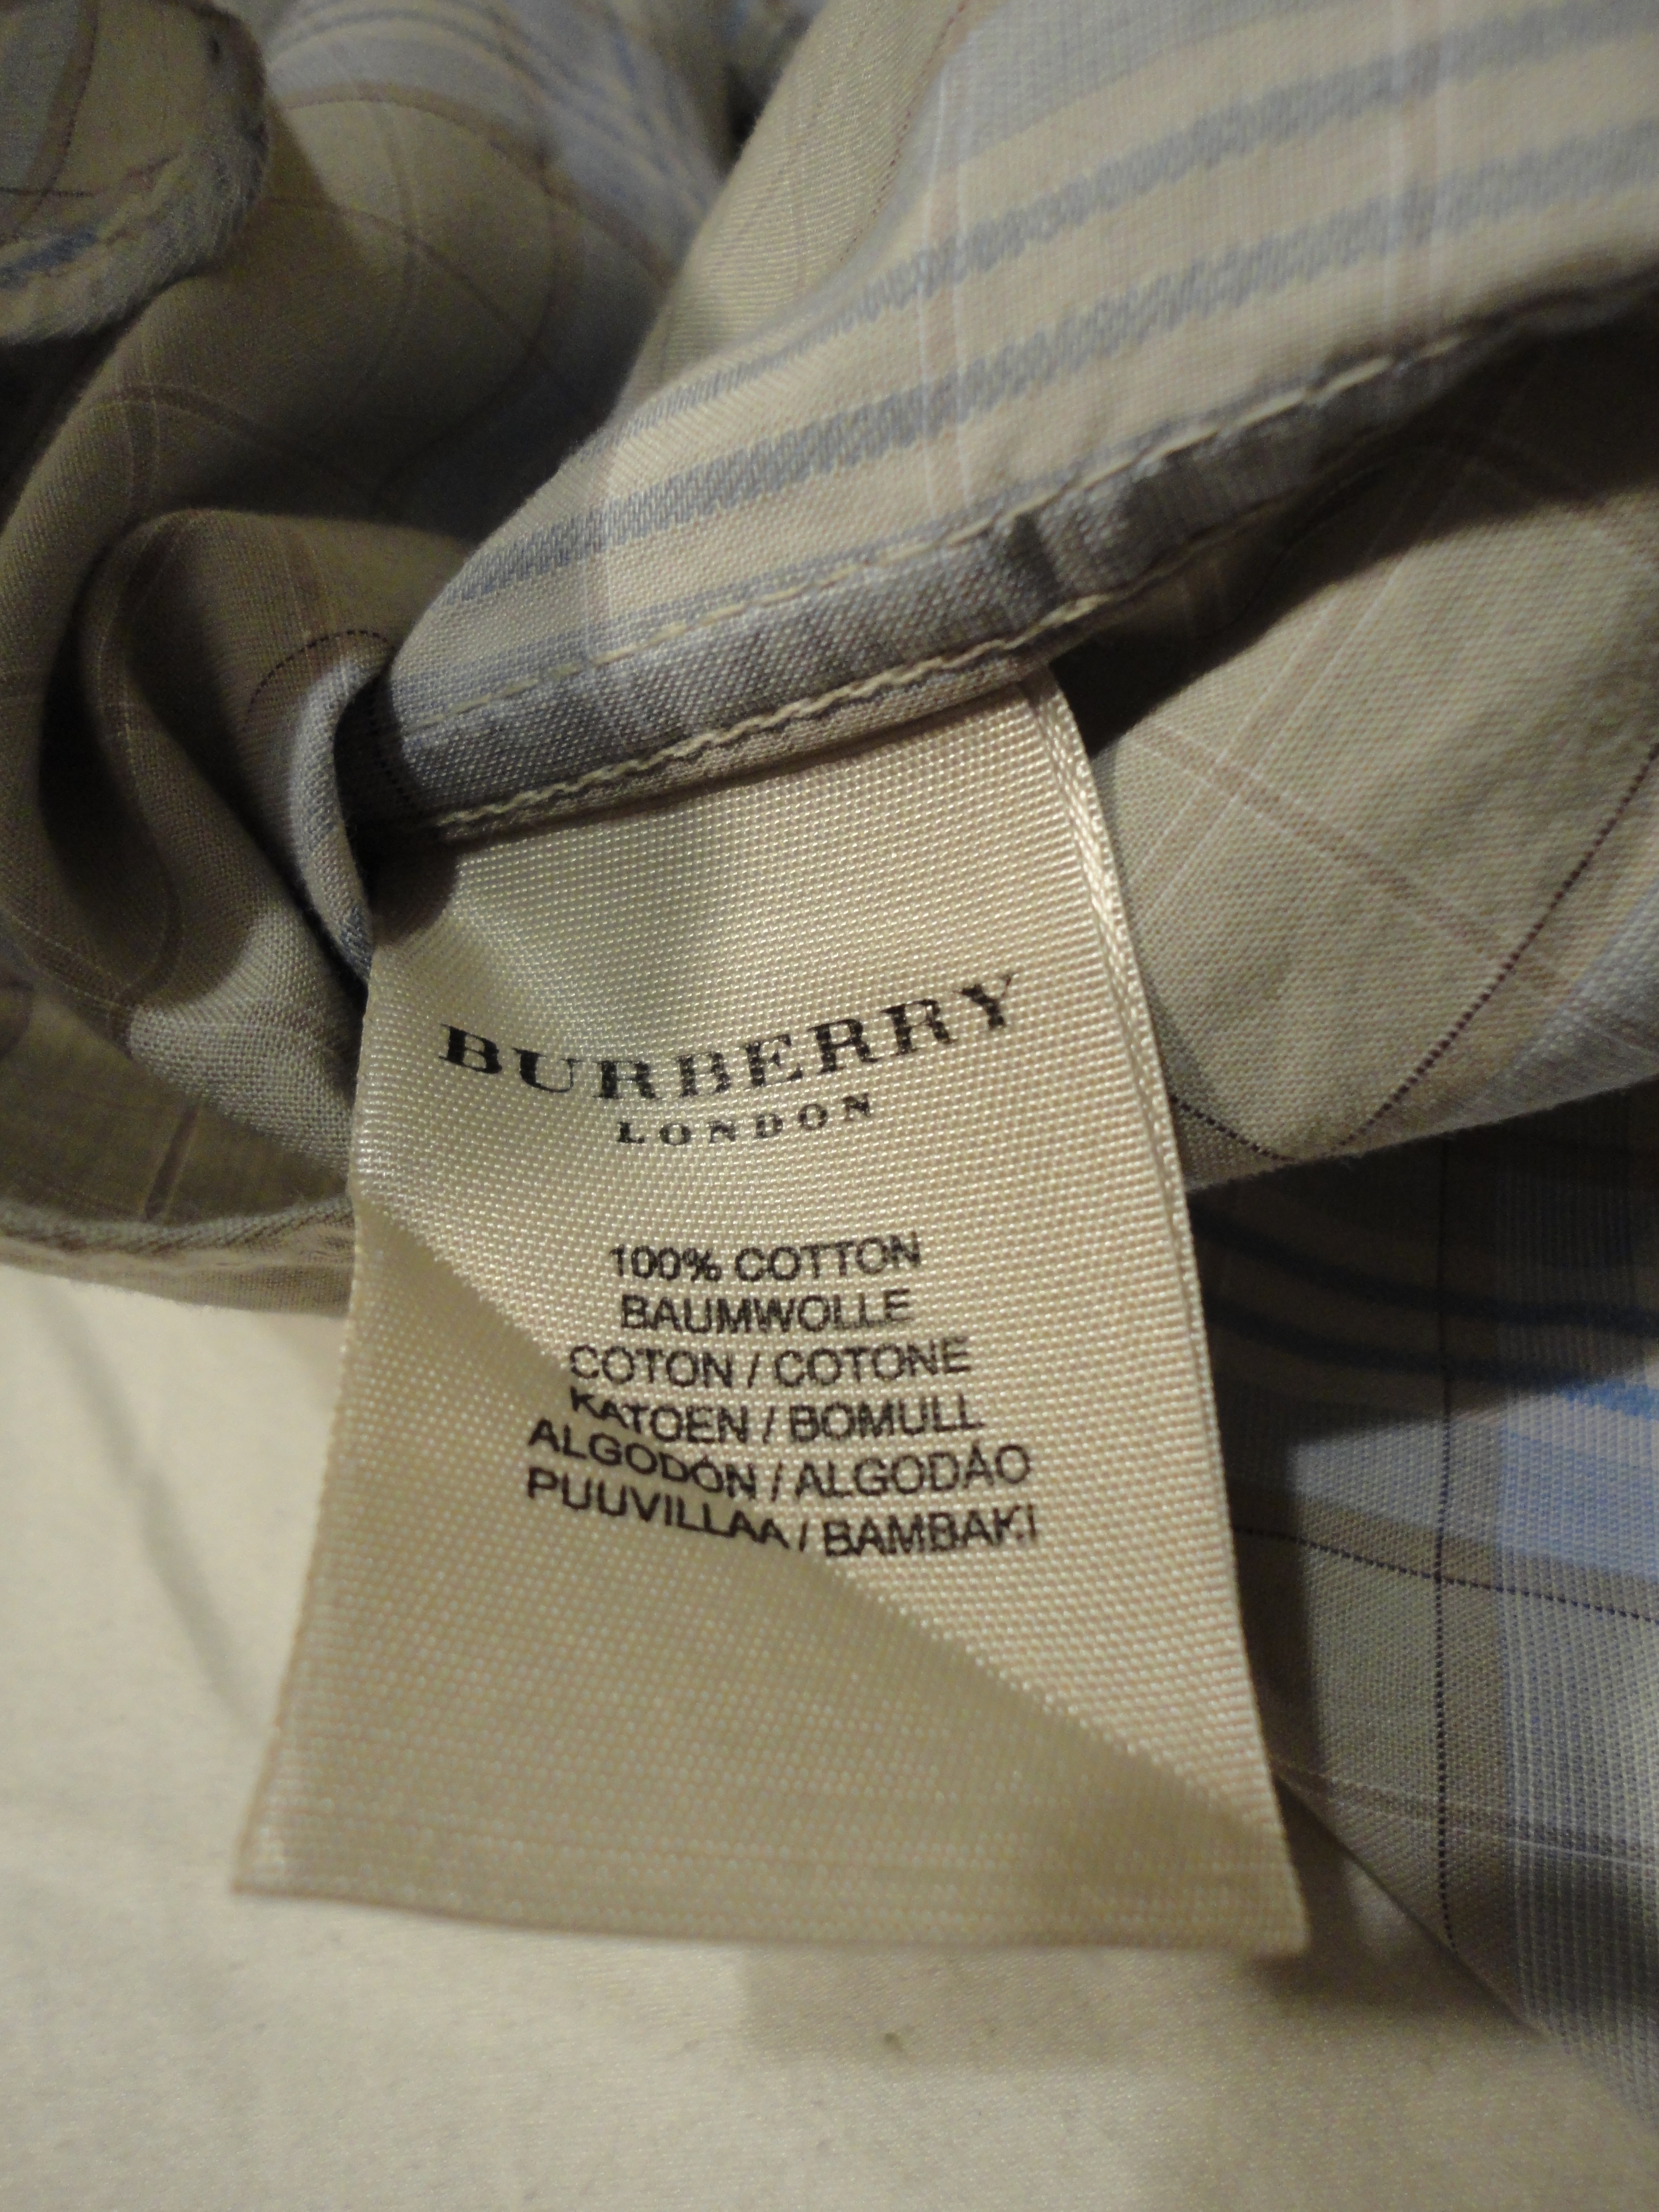 Help authenticating a Burberry shirt? - The eBay Community